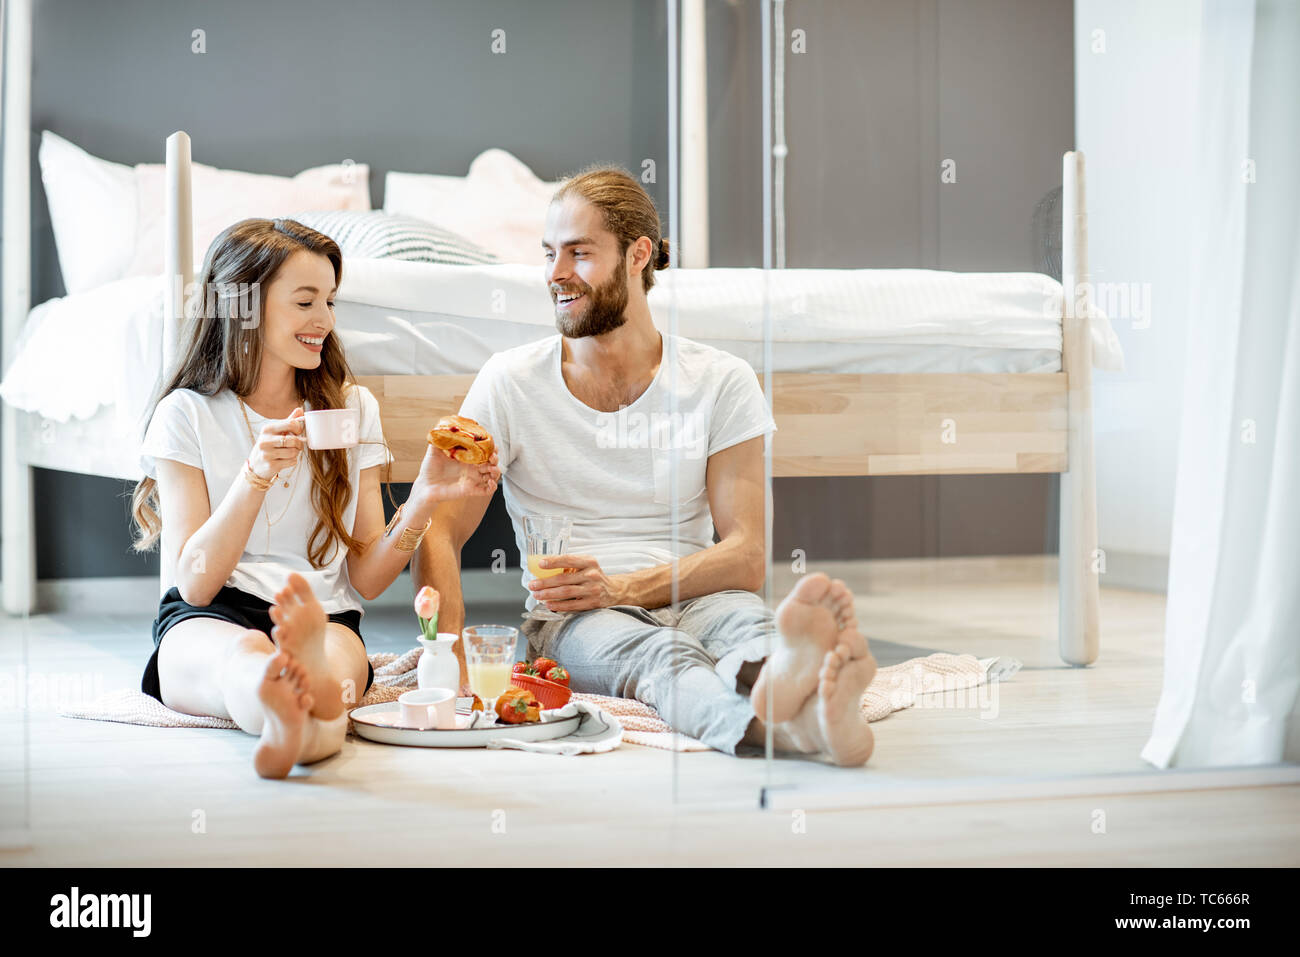 Young And Cheerful Couple Having A Breakfast Sitting